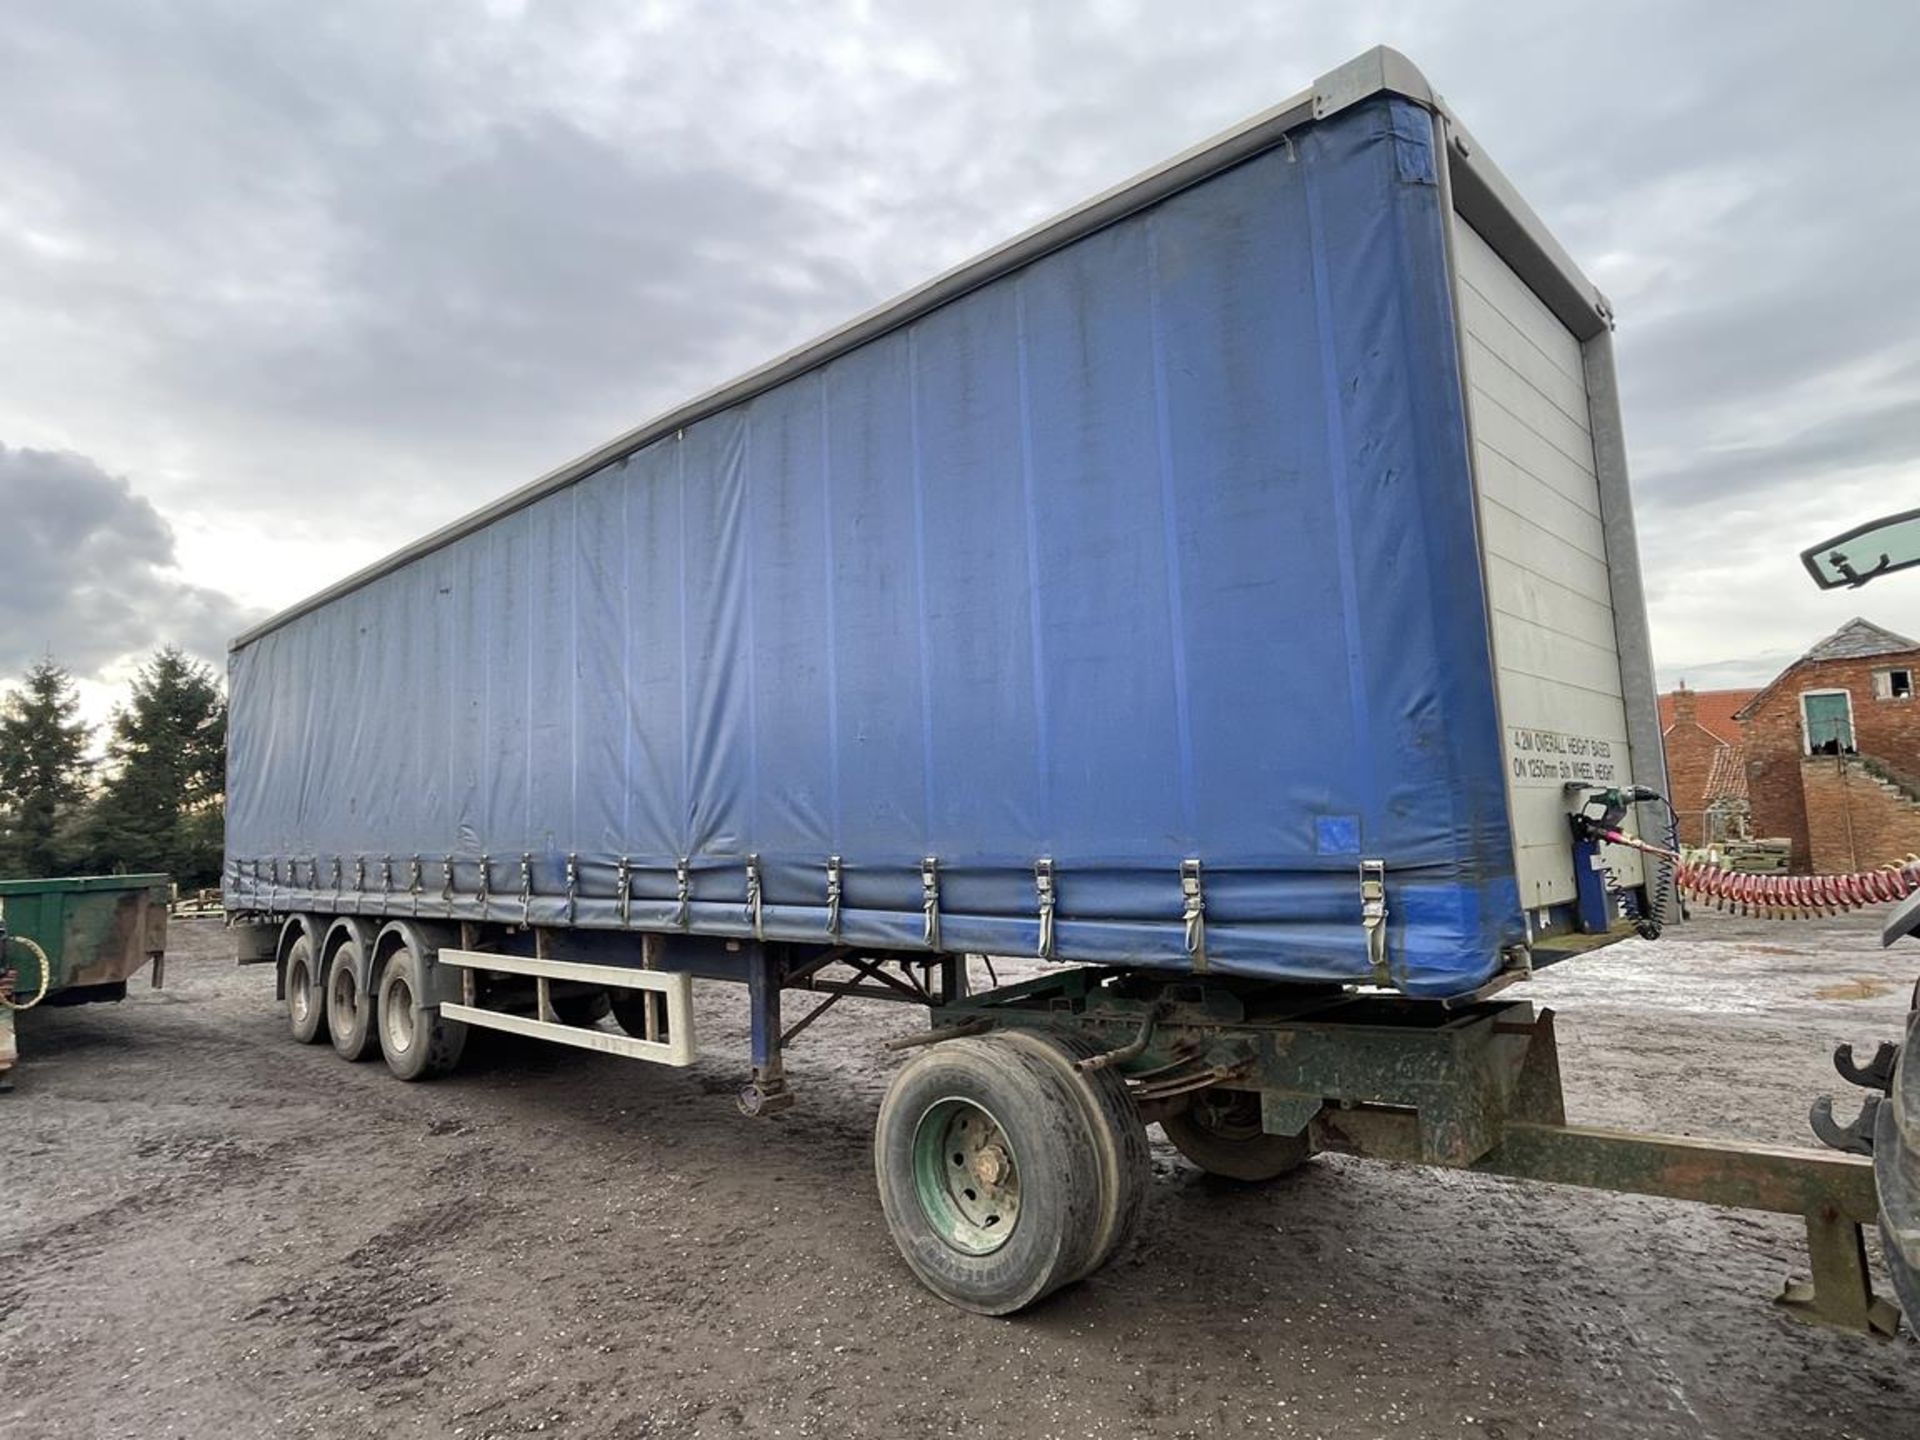 2006 Montracon EB+ ADR 25/2M Triple Axle Curtainside Trailer, VIN: 24688 with Rear Barn Doors. - Image 8 of 12